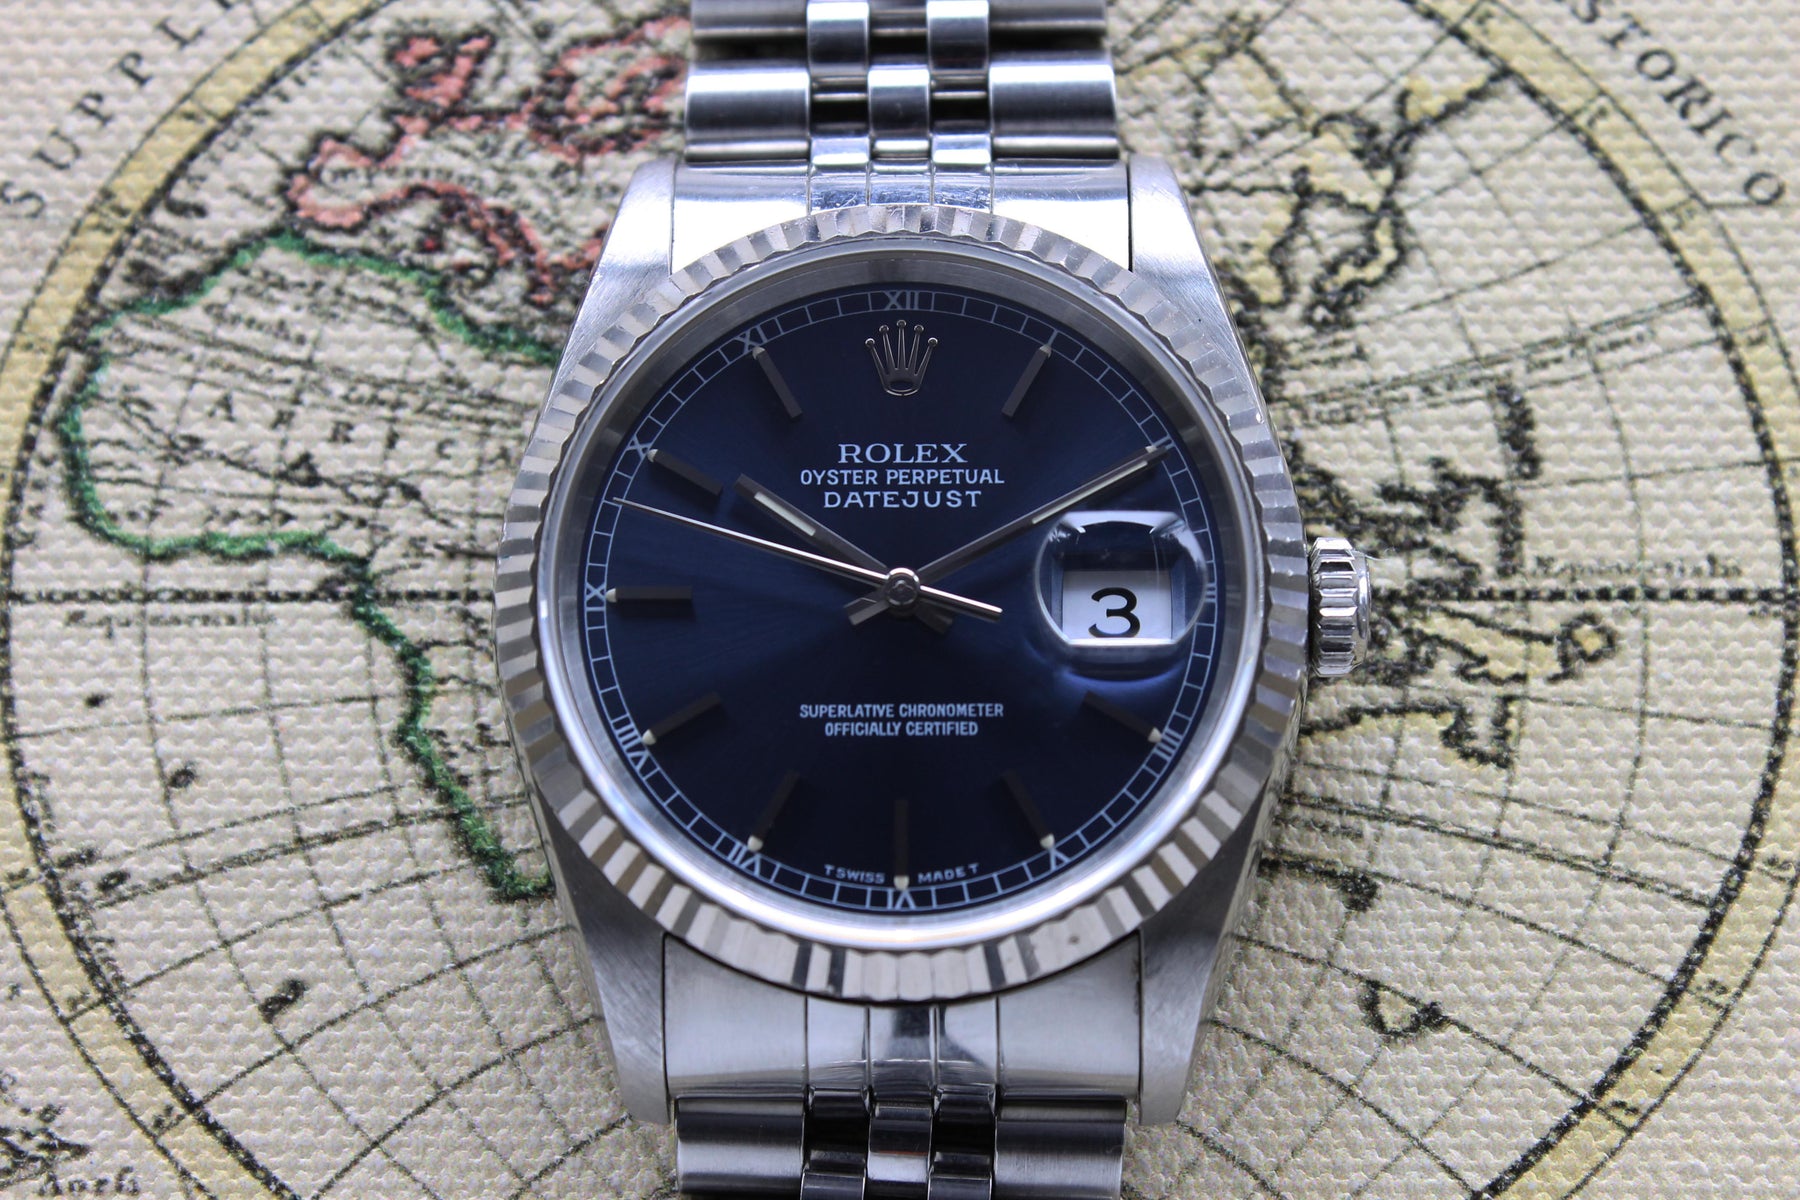 Rolex Datejust Ref. 16234 Year 1996 (with Papers)